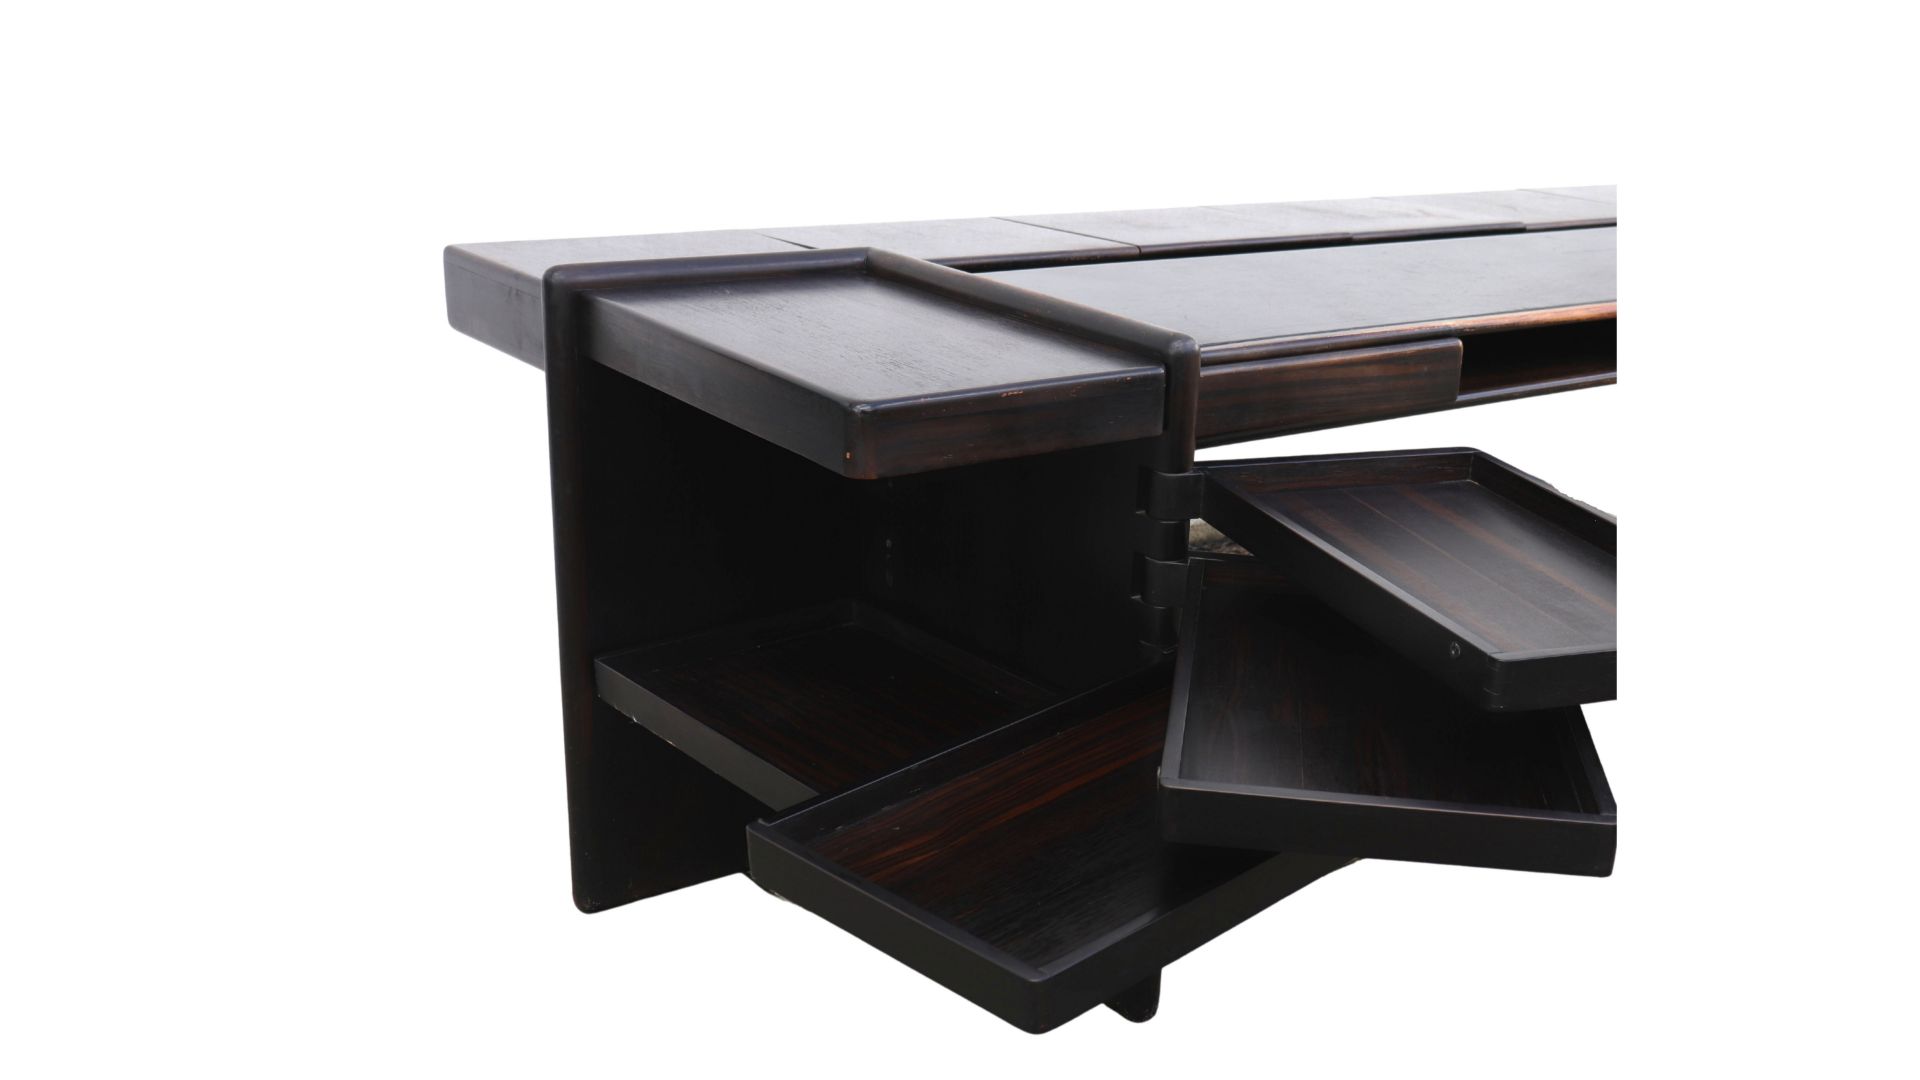 Exceptional large rosewood desk with multiple storage Bernini house - Image 5 of 6